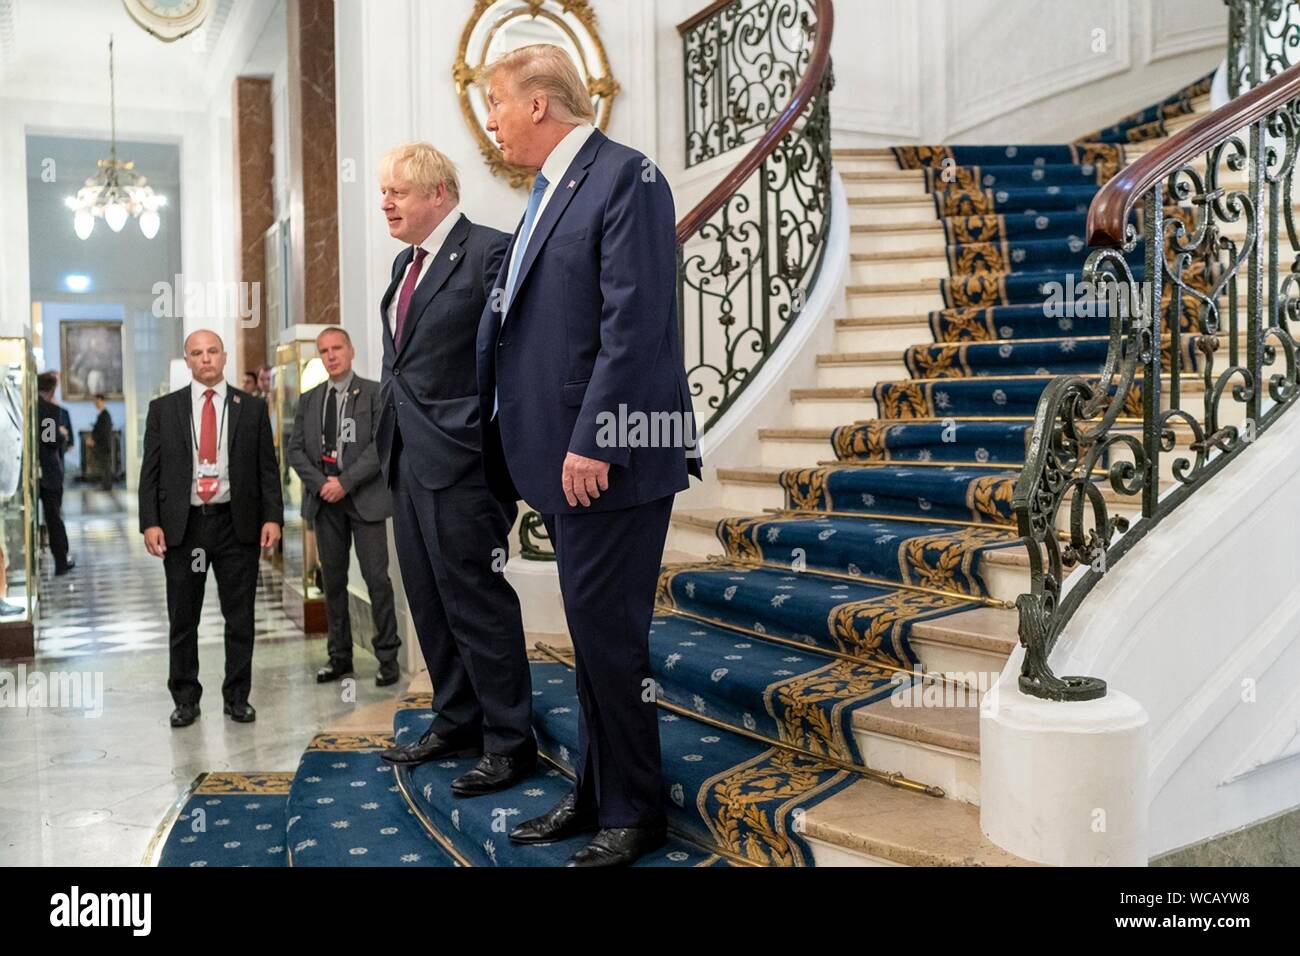 U.S. President Donald Trump, right, stands with British Prime Minister Boris Johnson following their meeting on the sidelines of the G7 Summit at the Hotel du Palais Biarritz August 25, 2019 in Biarritz, France. Stock Photo